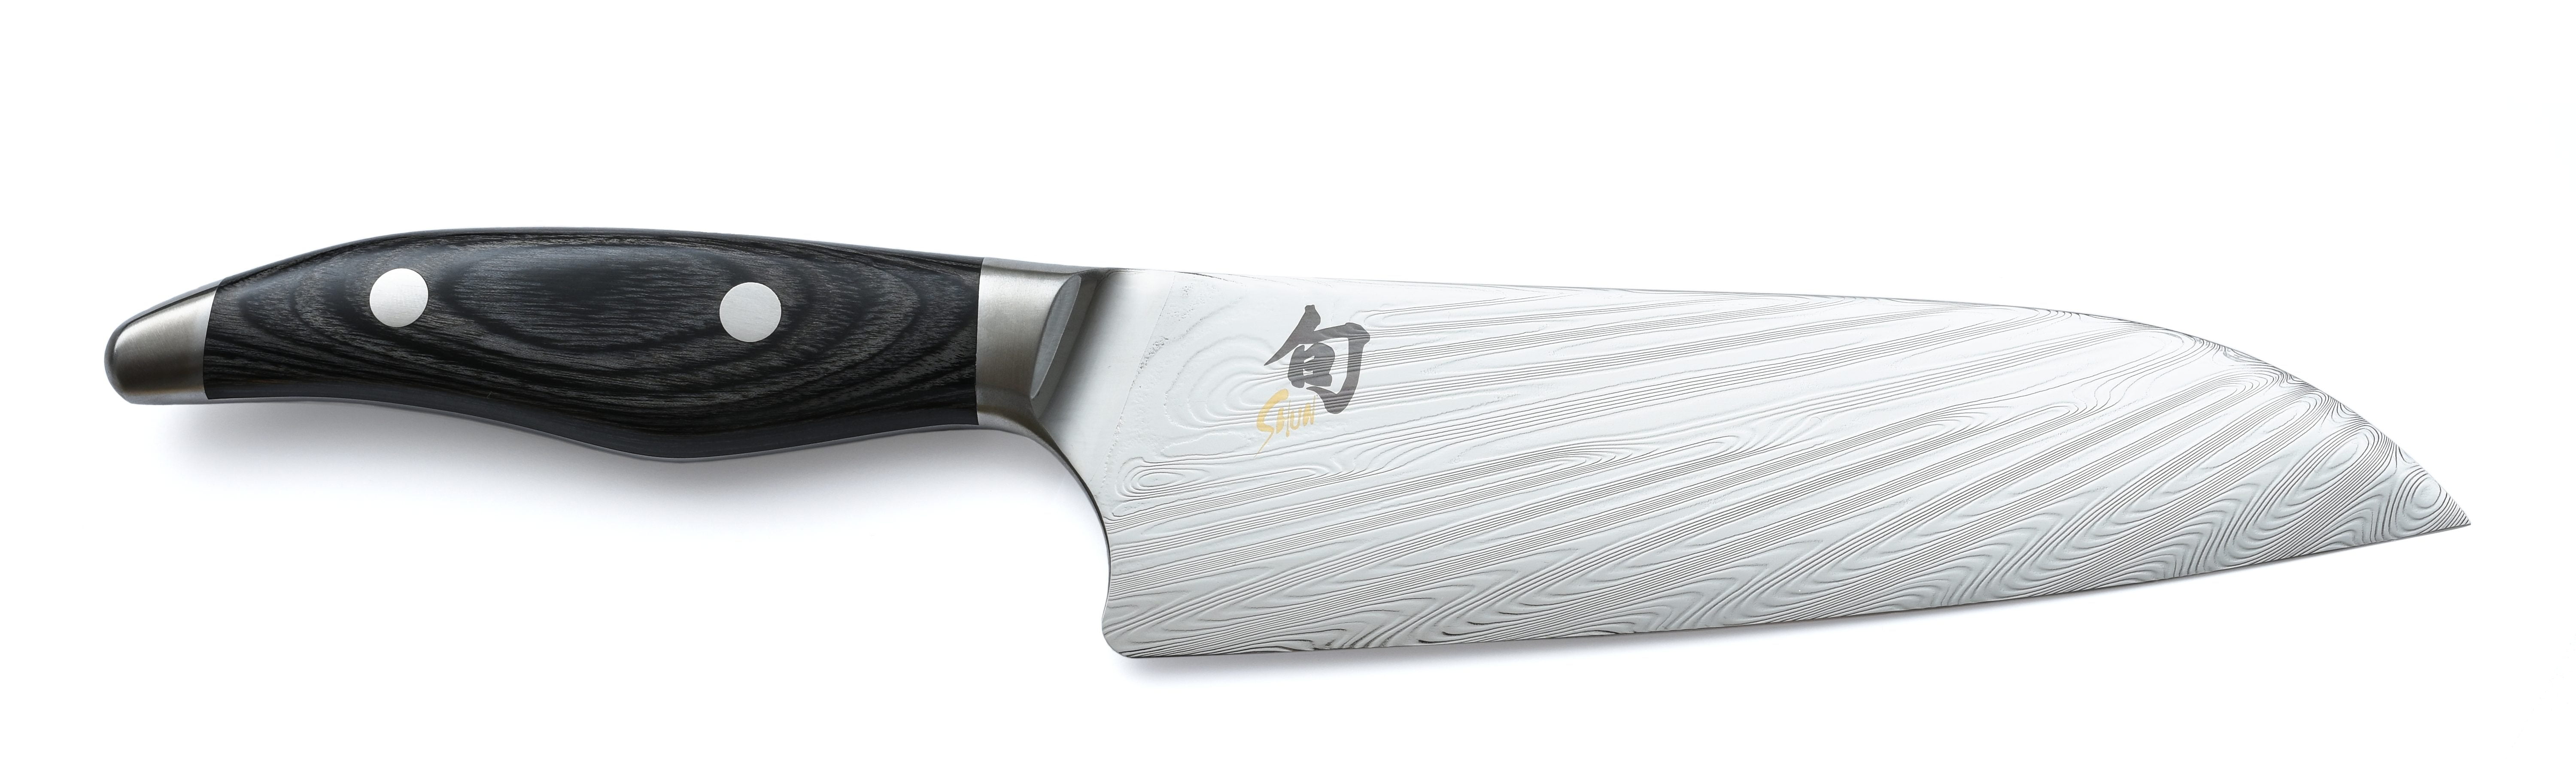 a chef's knife on a blank background